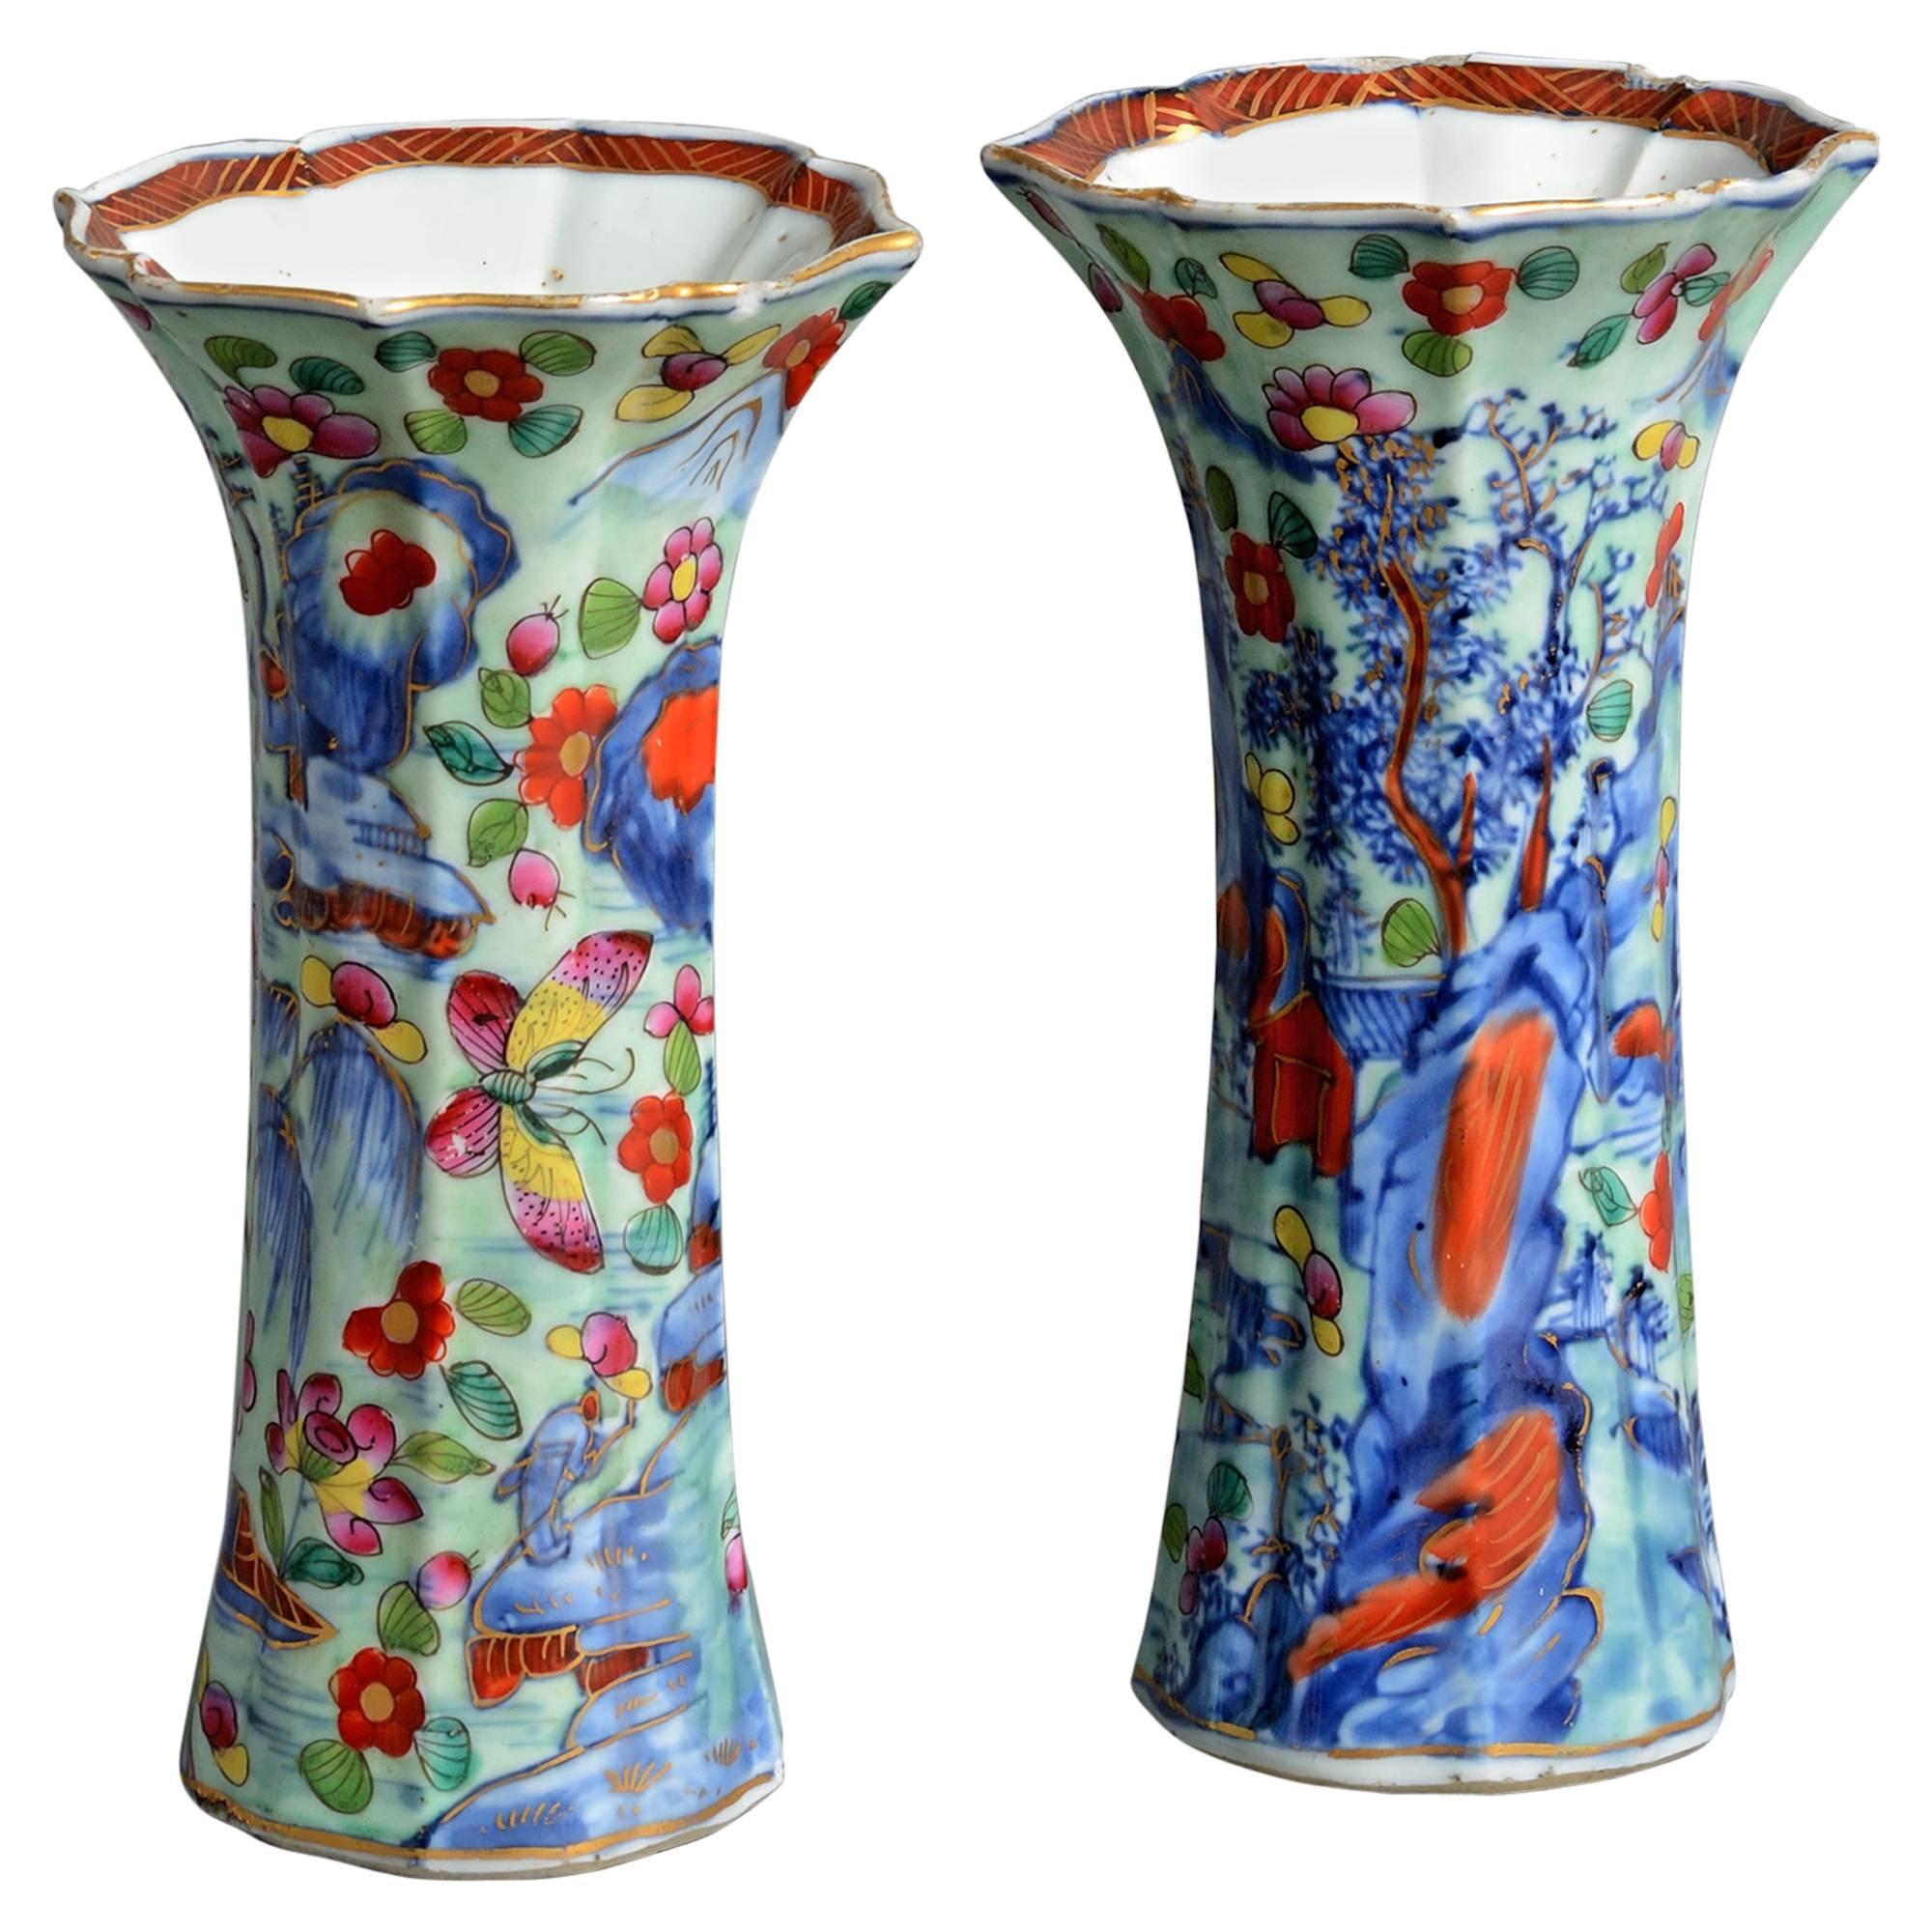 Pair of 18th Century Clobbered Porcelain Turquoise, Blue & Red Trumpet Vases